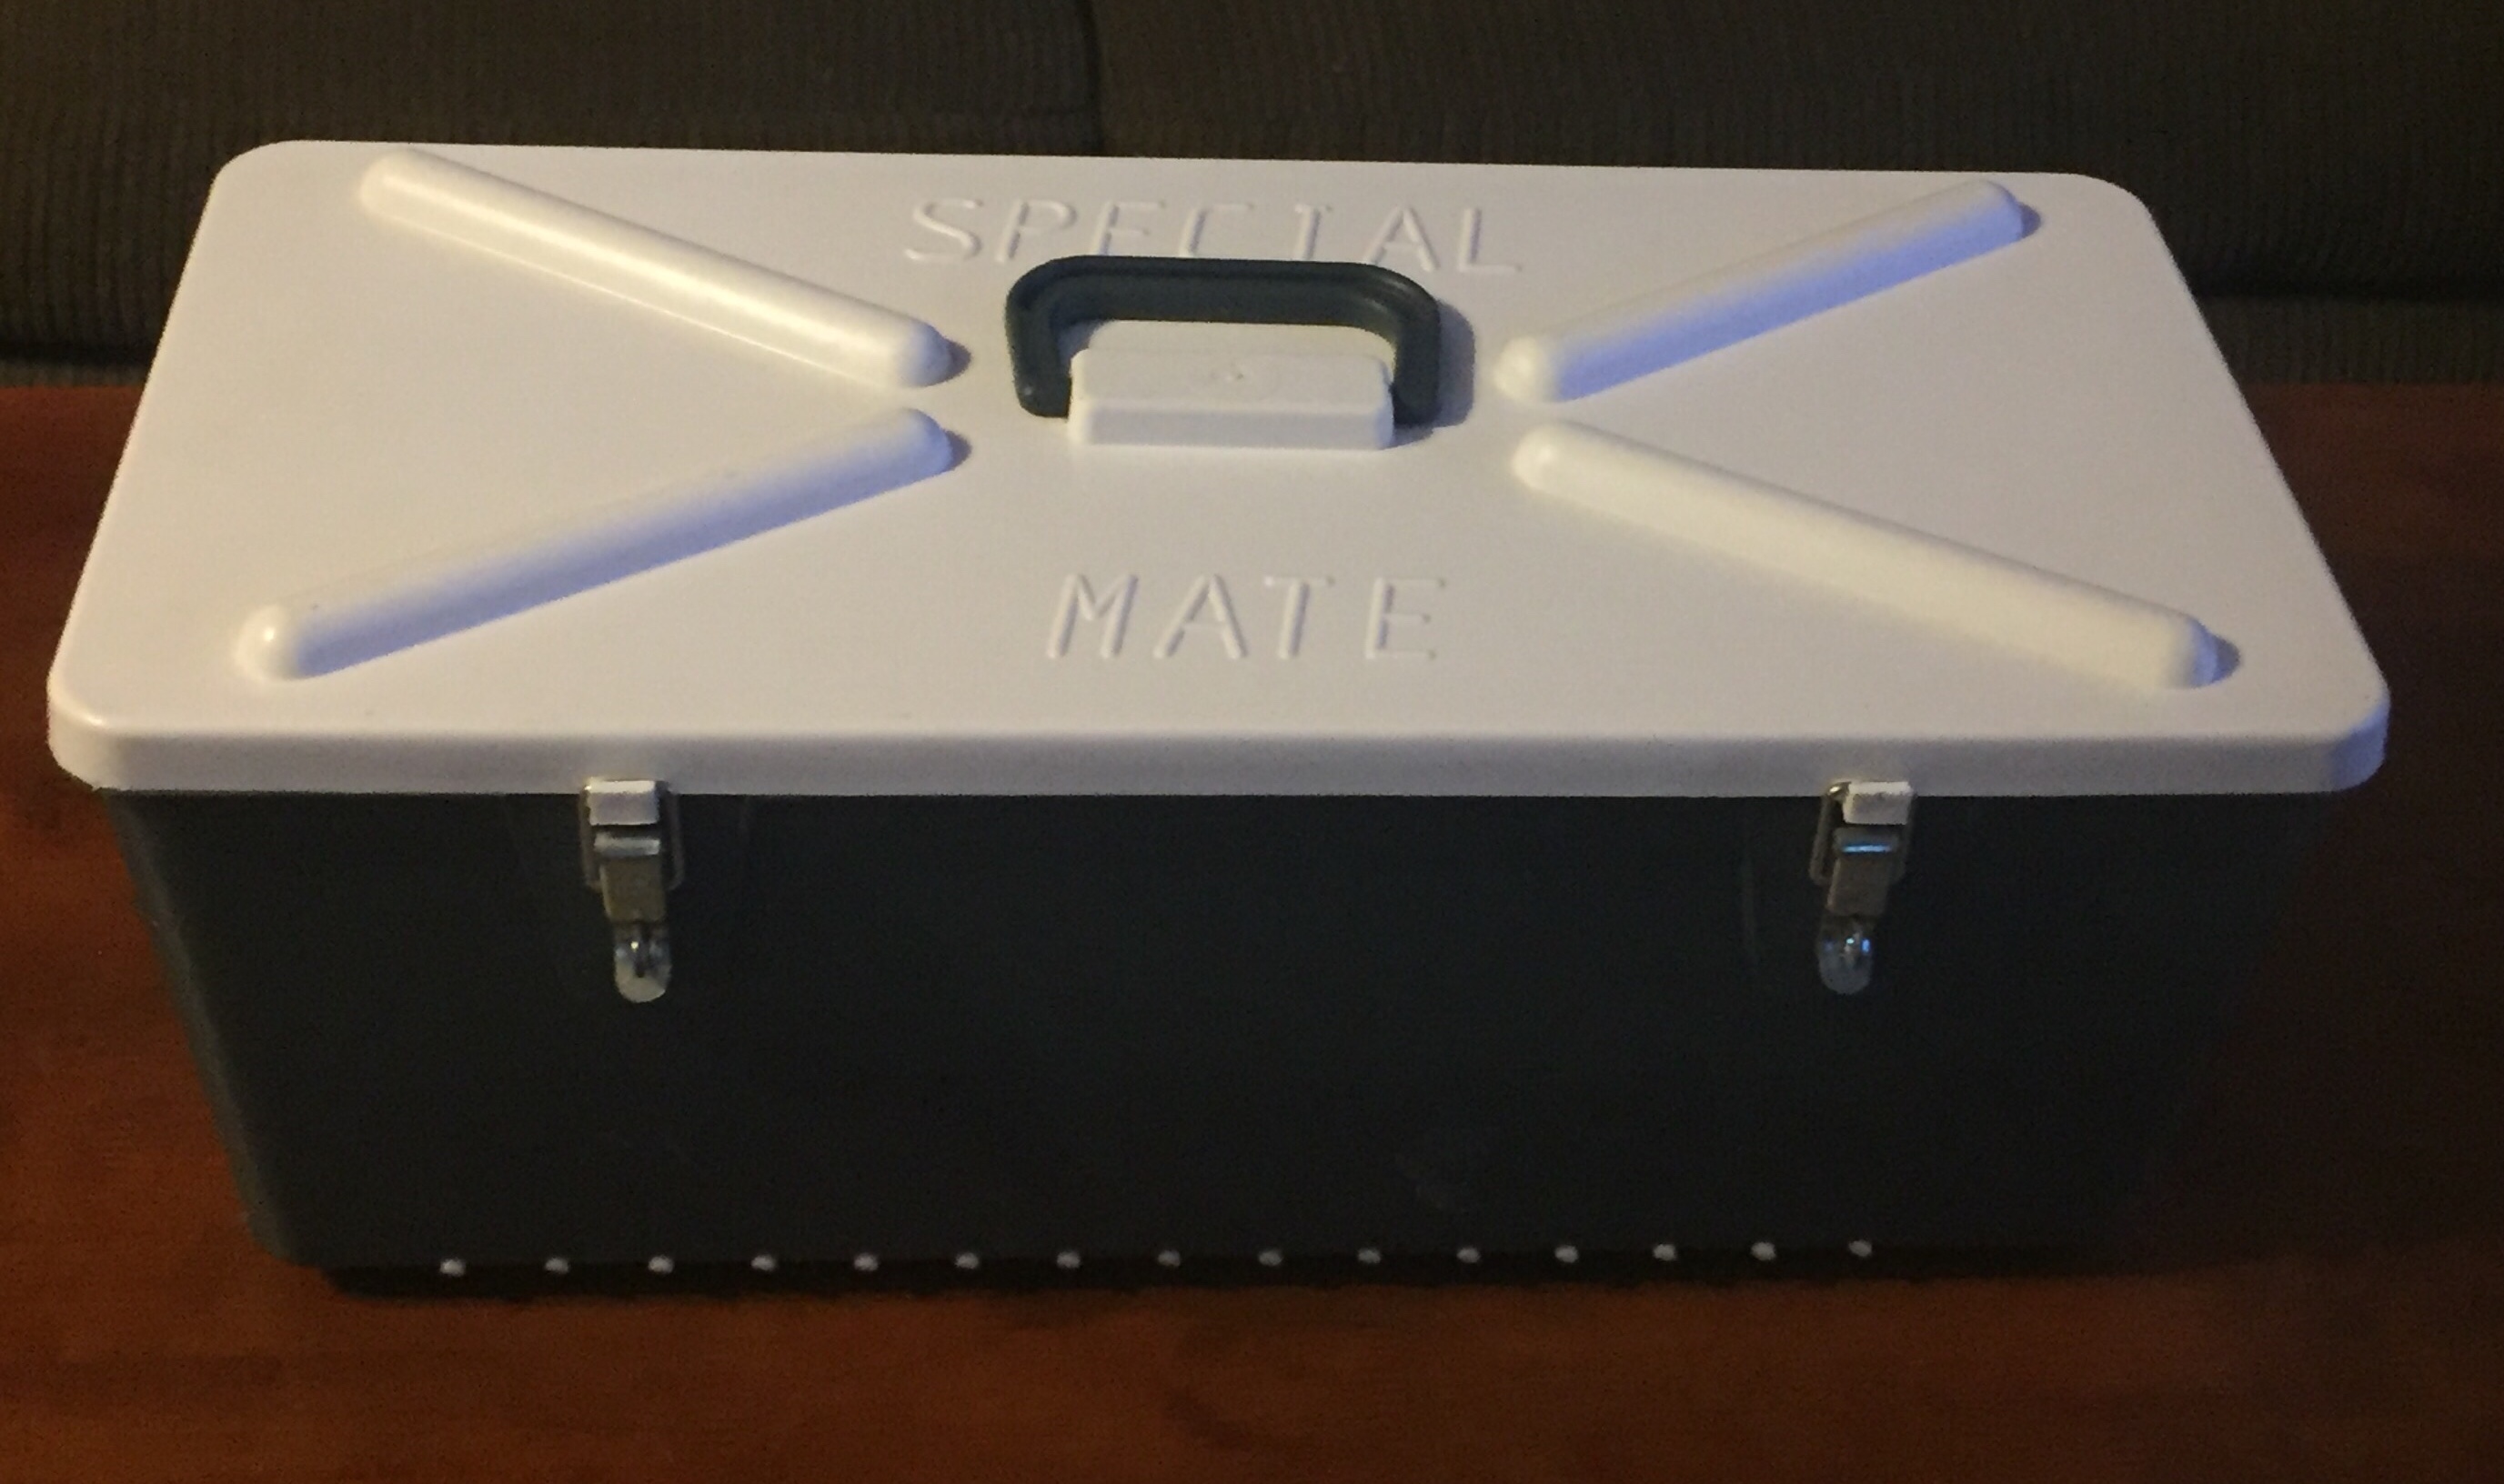 Special Mate 8” stick bait box $65 - Classifieds - Buy, Sell, Trade or Rent  - Lake Ontario United - Lake Ontario's Largest Fishing & Hunting Community  - New York and Ontario Canada